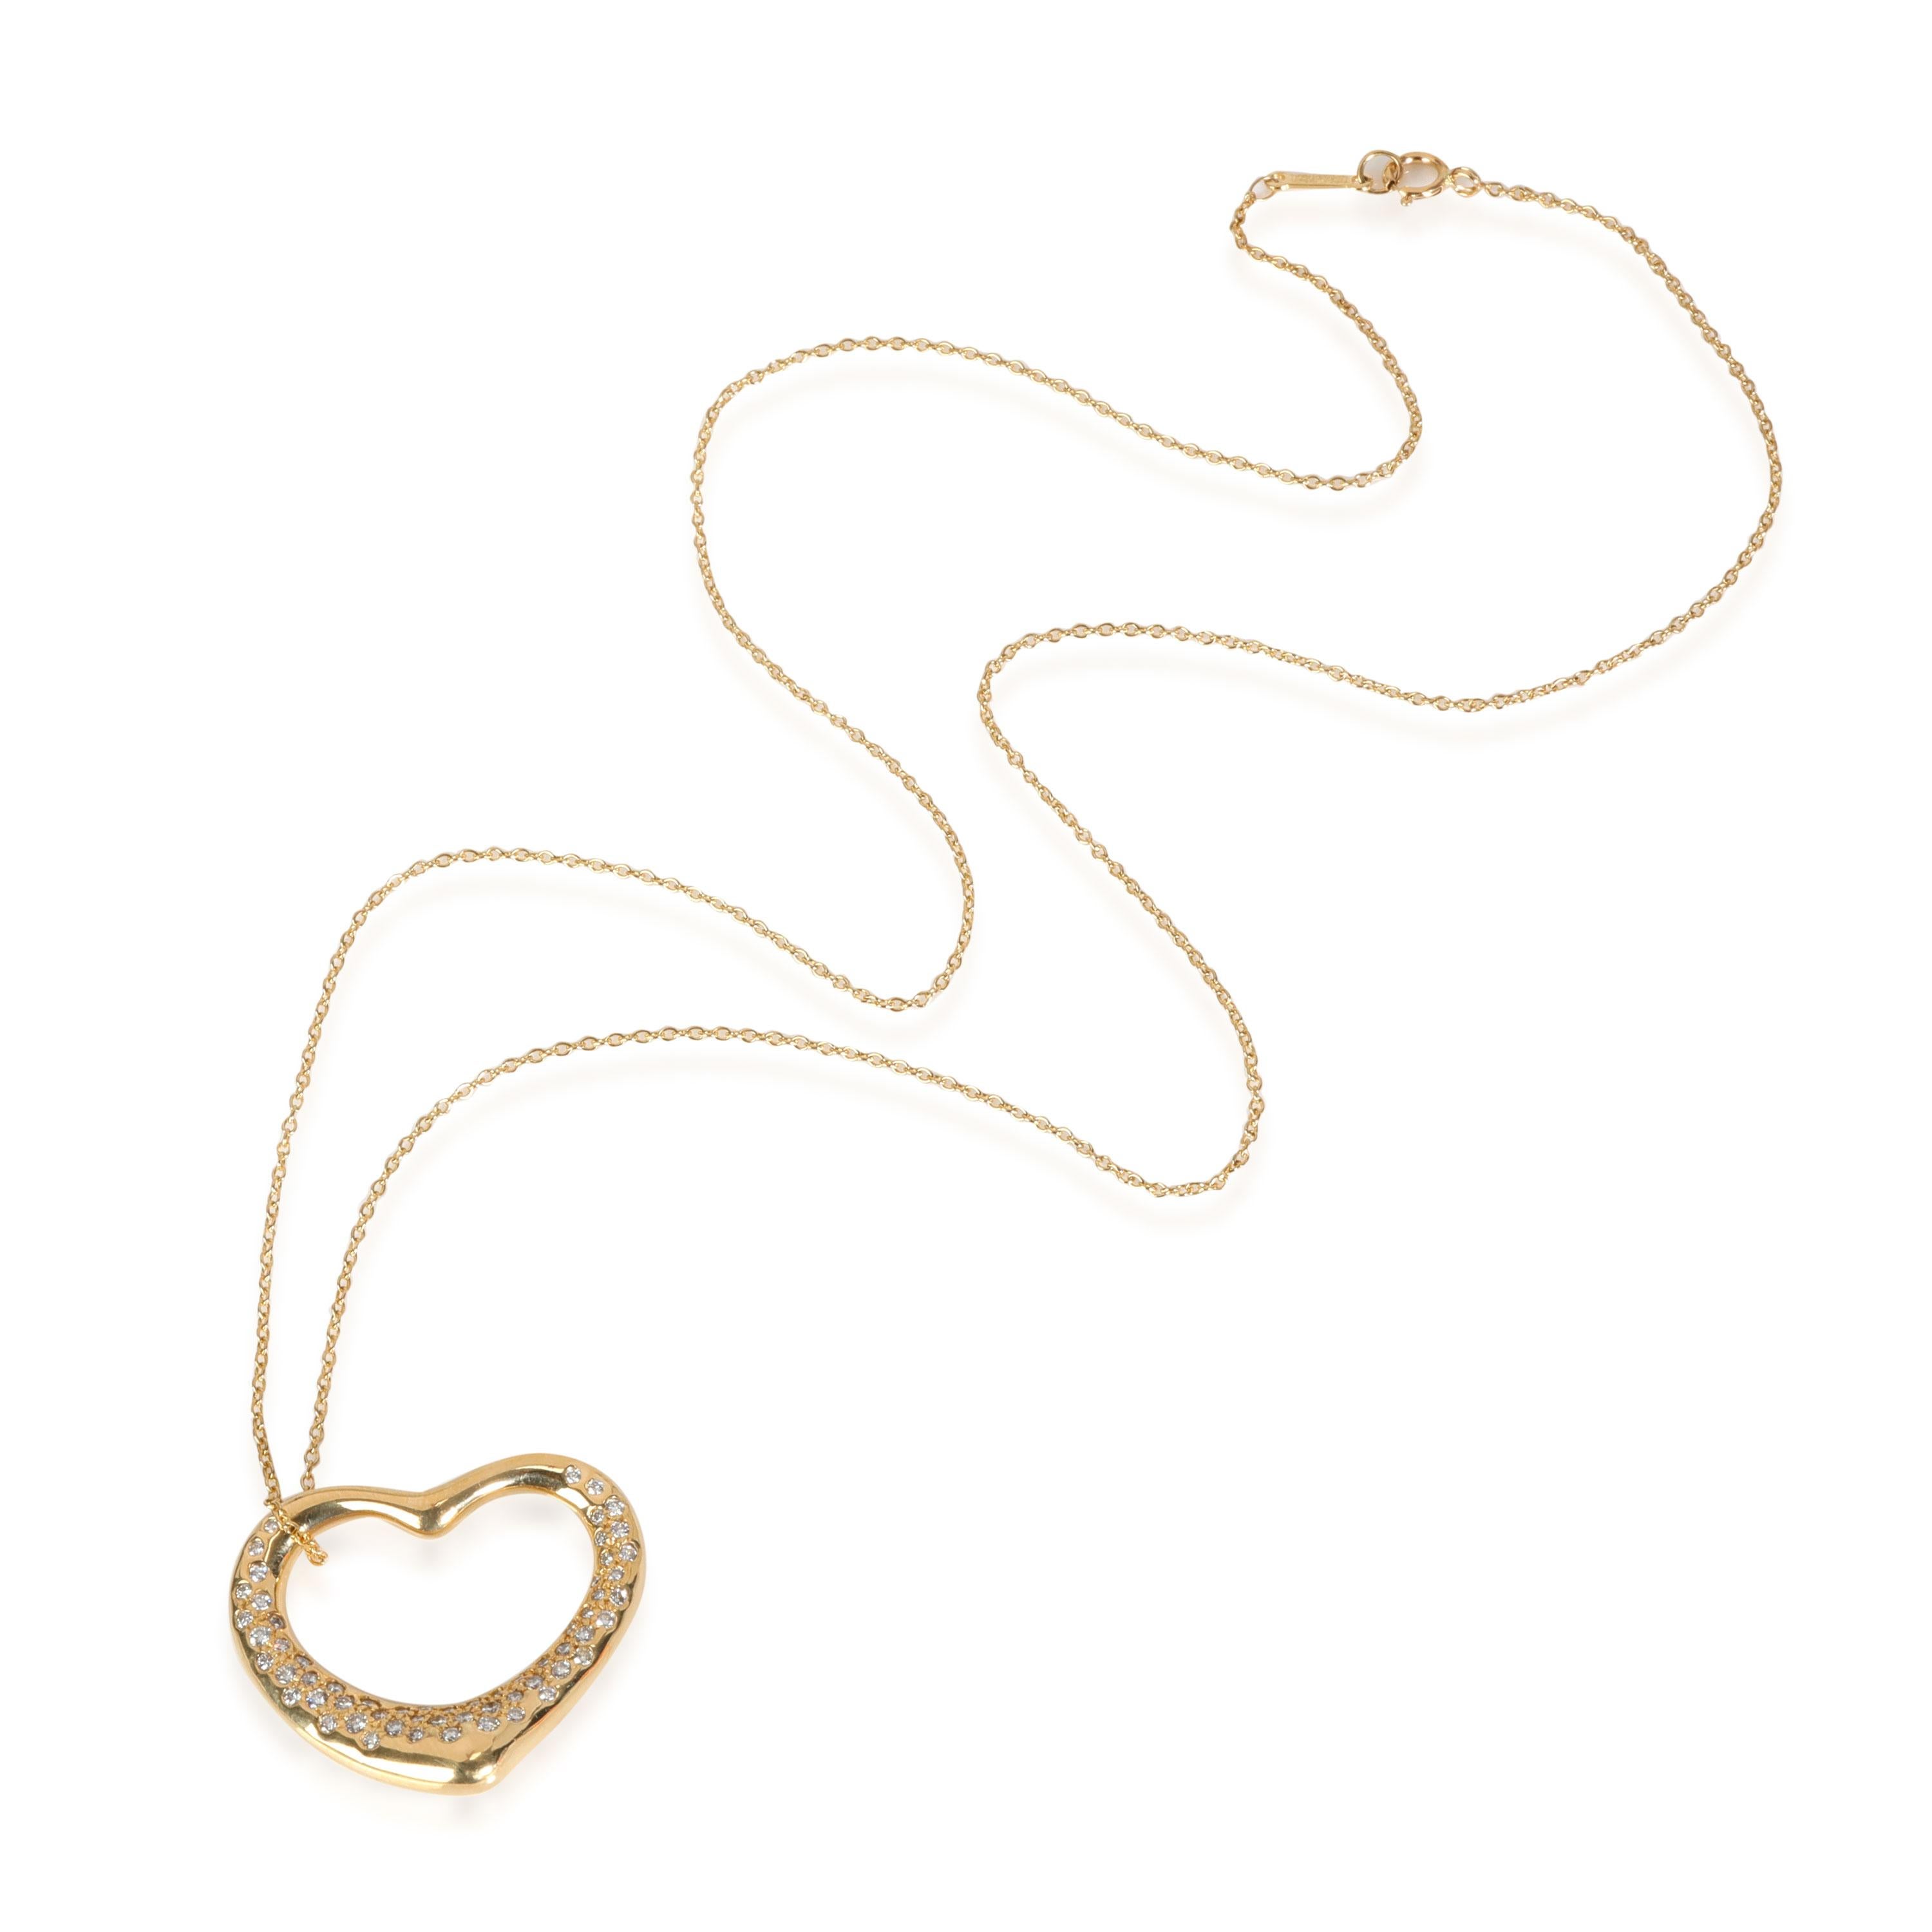 Tiffany & Co. Elsa Peretti Diamond Open Heart Pendant in 18k Yellow Gold 1 CTW

PRIMARY DETAILS
SKU: 116732
Listing Title: Tiffany & Co. Elsa Peretti Diamond Open Heart Pendant in 18k Yellow Gold 1 CTW
Condition Description: Retails for 9200 USD. In